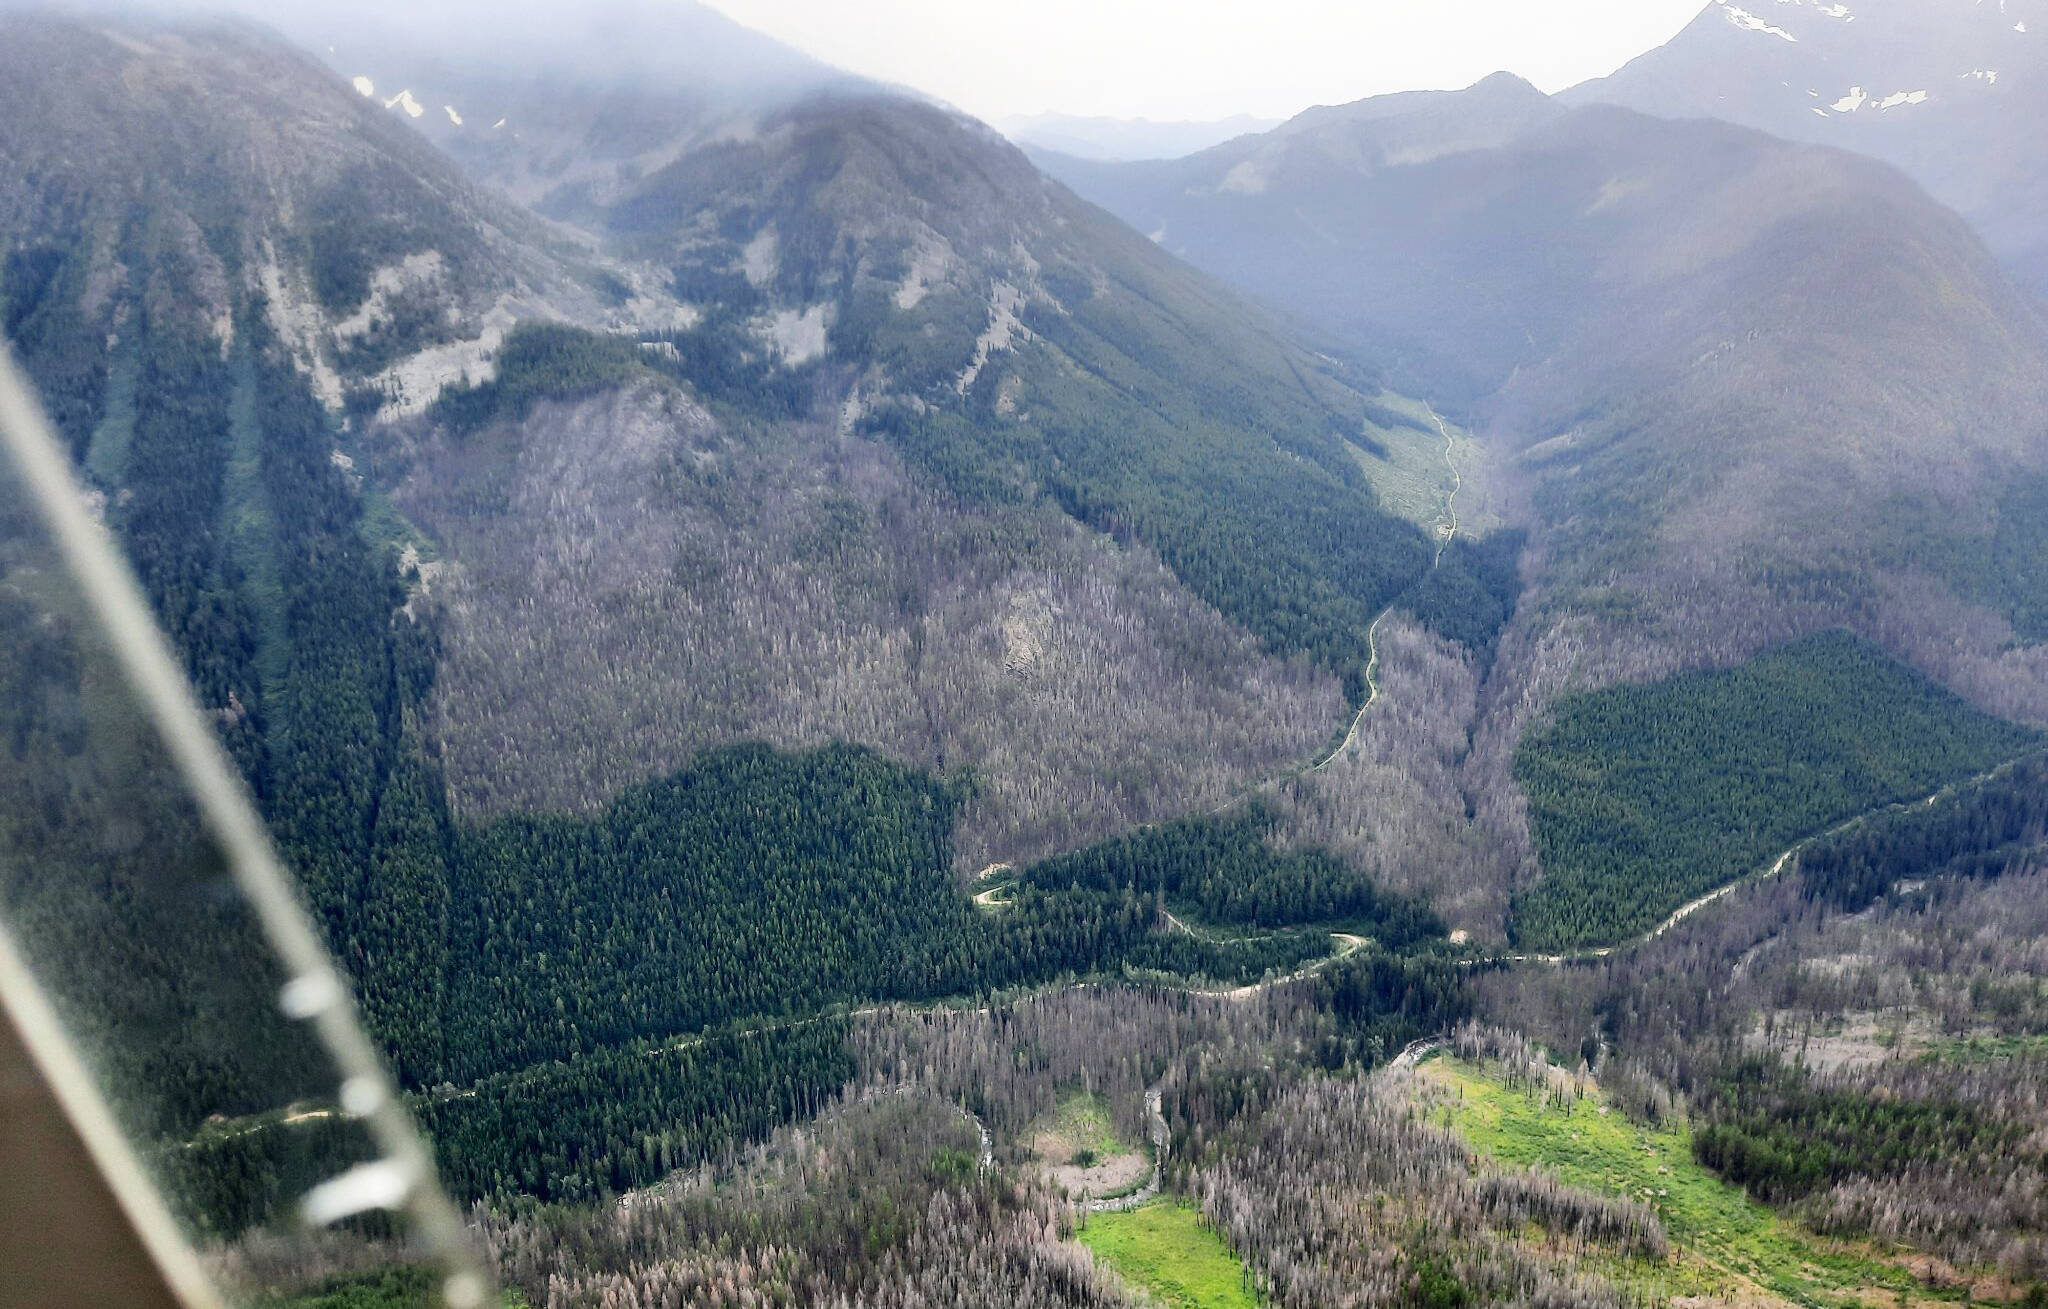 View from the reconnaissance flight. BC Wildfire Service